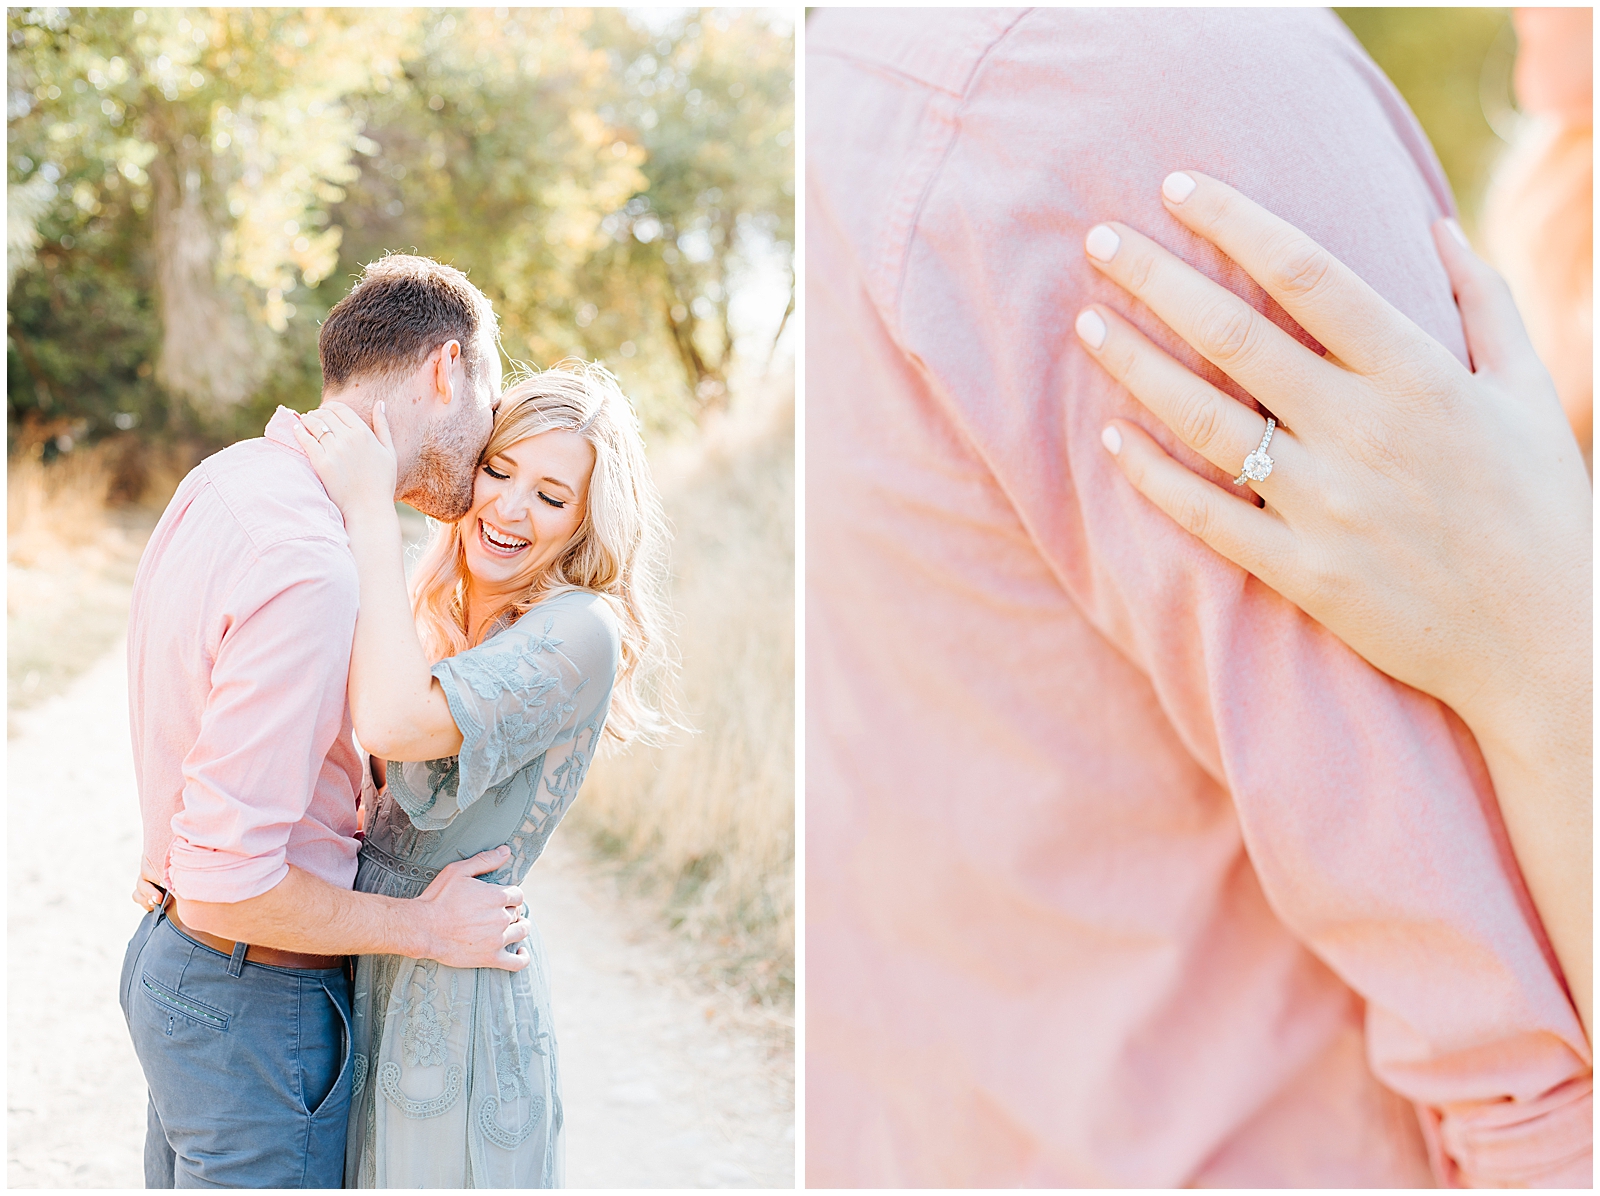 Dreamy Engagement Session Outfit: blue lacy dress and pink shirt